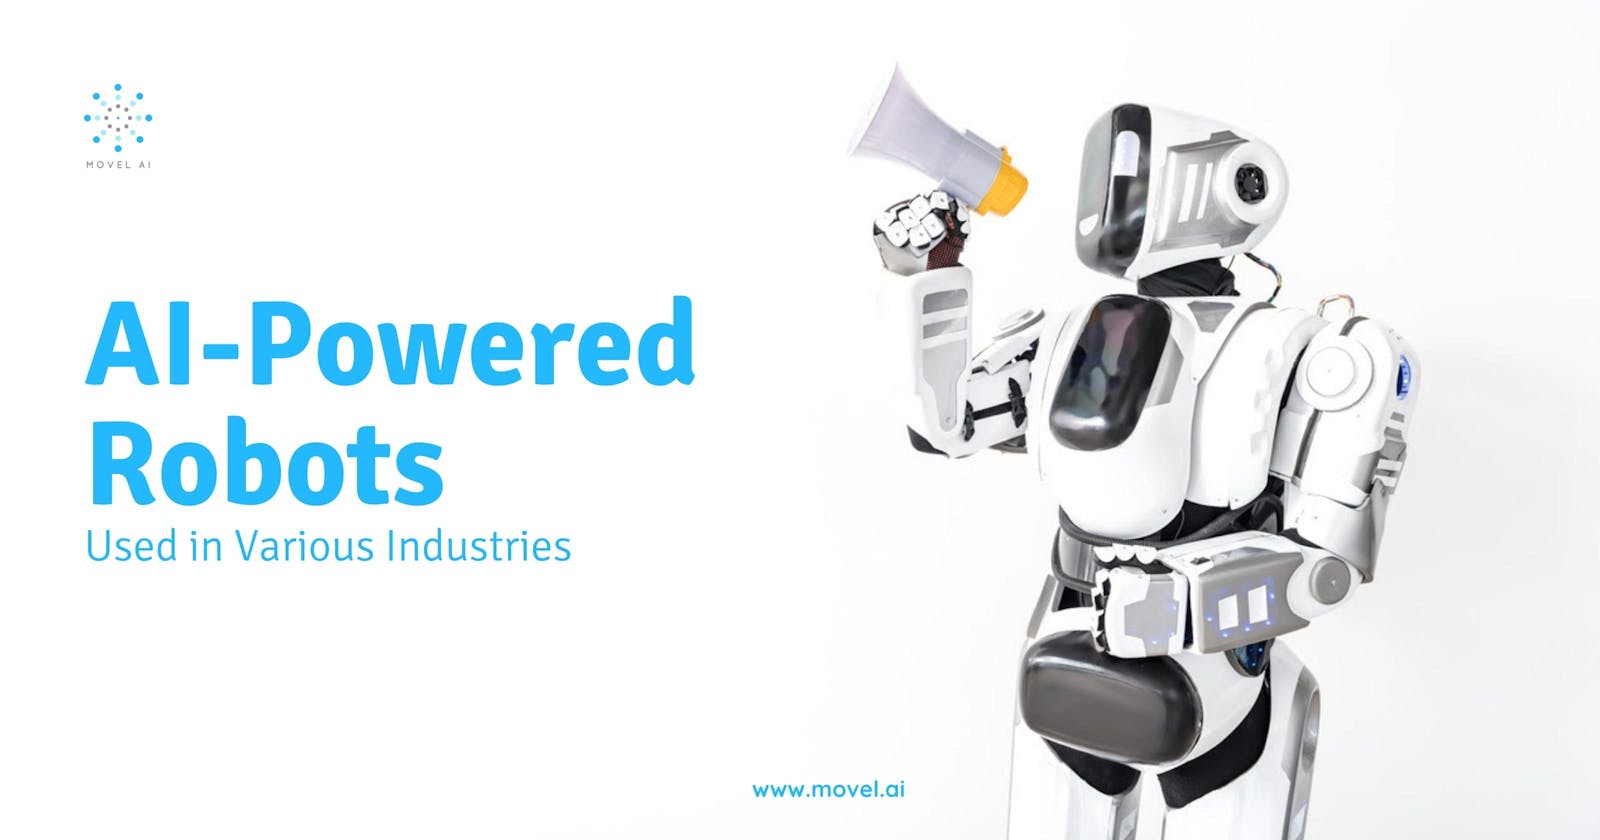 AI-Powered Robots Used in Various Industries